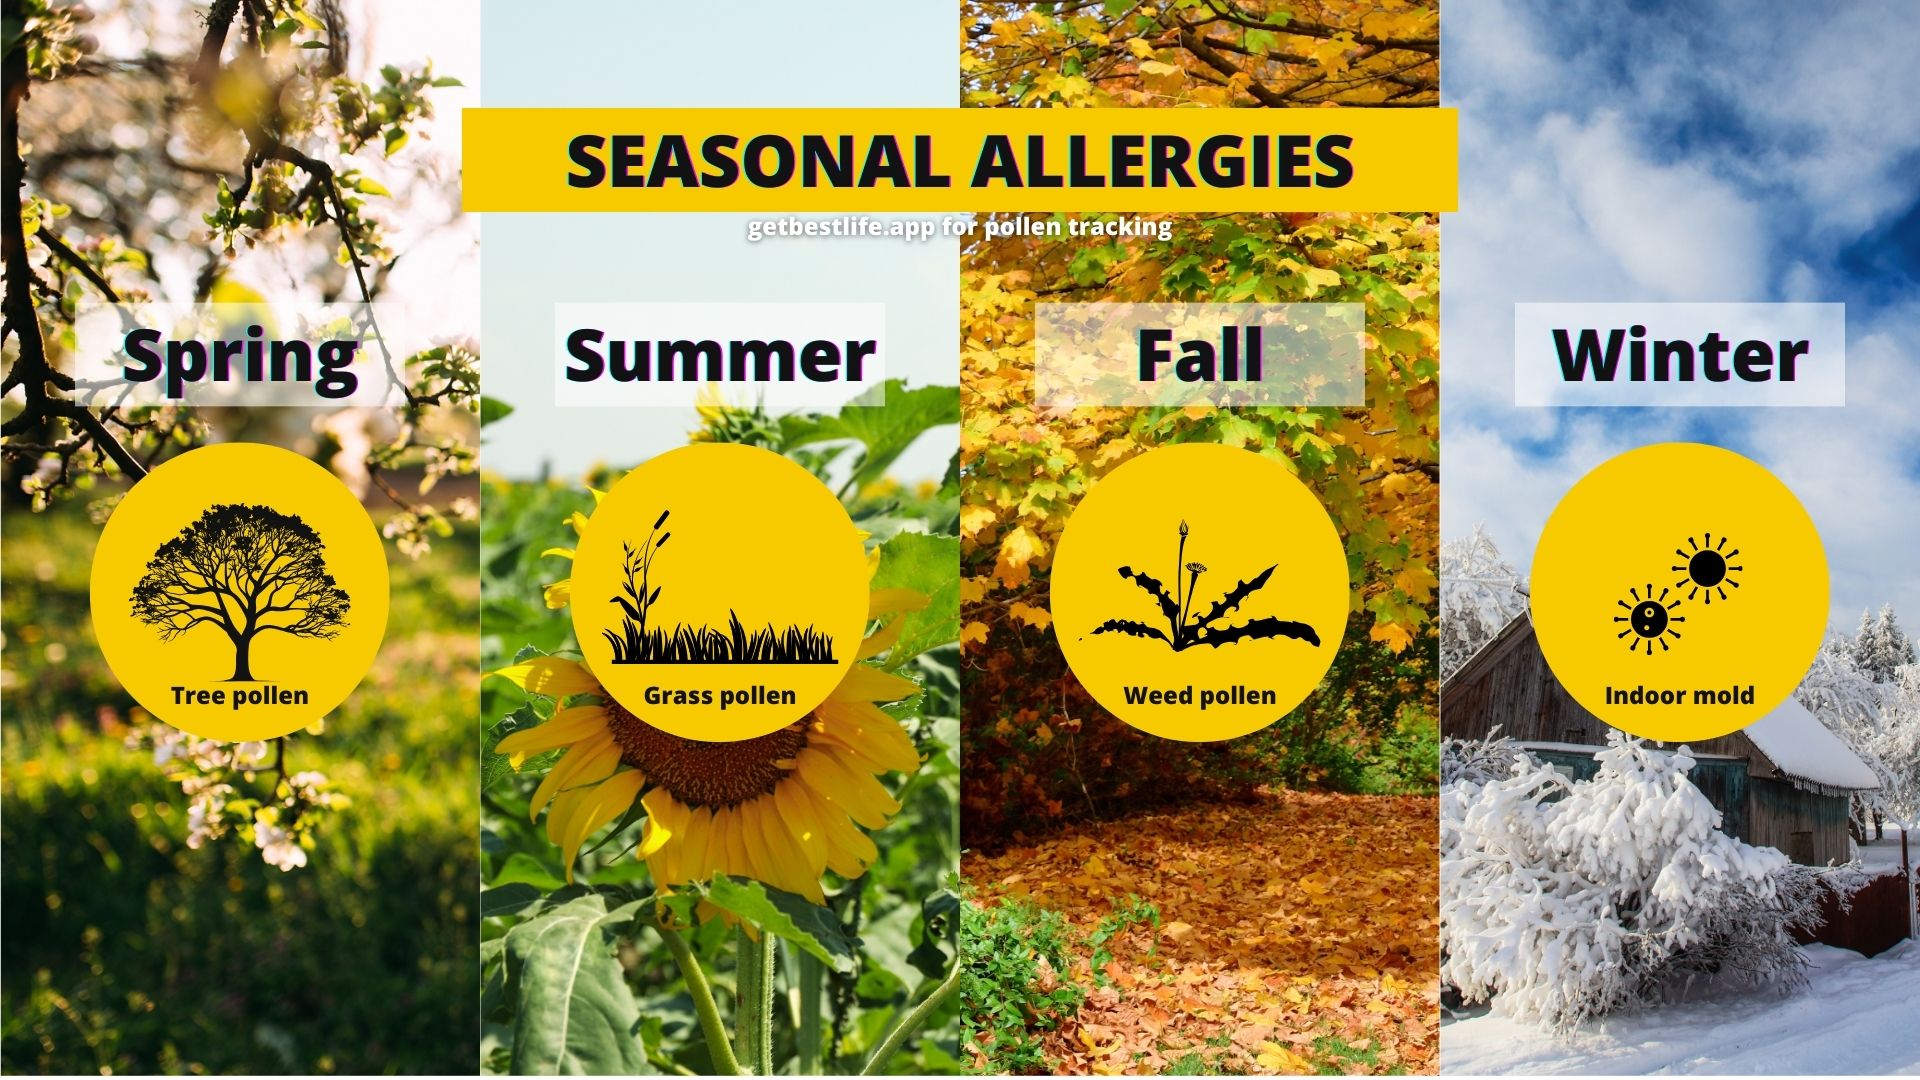 common pollen allergens by season, focusing on seasonal allergies divided into four sections representing spring, summer, fall, and winter, with icons indicating the prevalence of tree, grass, and weed pollens throughout the year